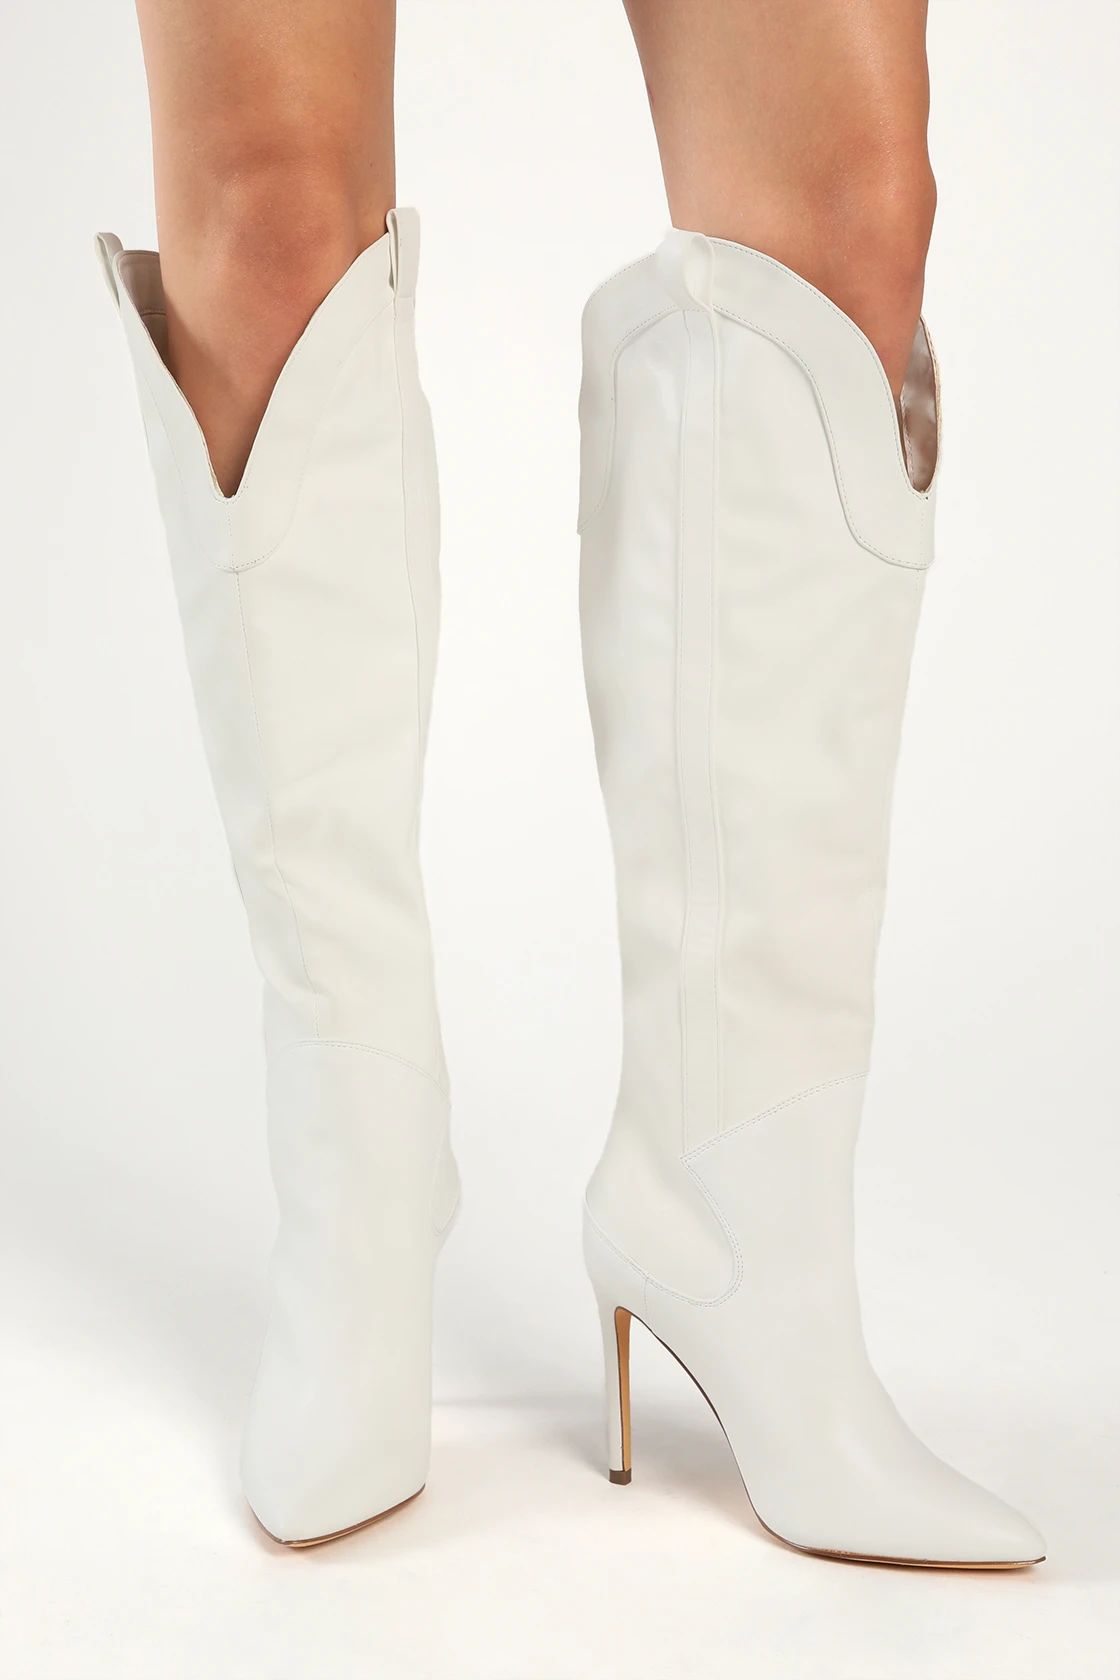 Sayyna Off White Pointed-Toe Knee-High Boots | Lulus (US)